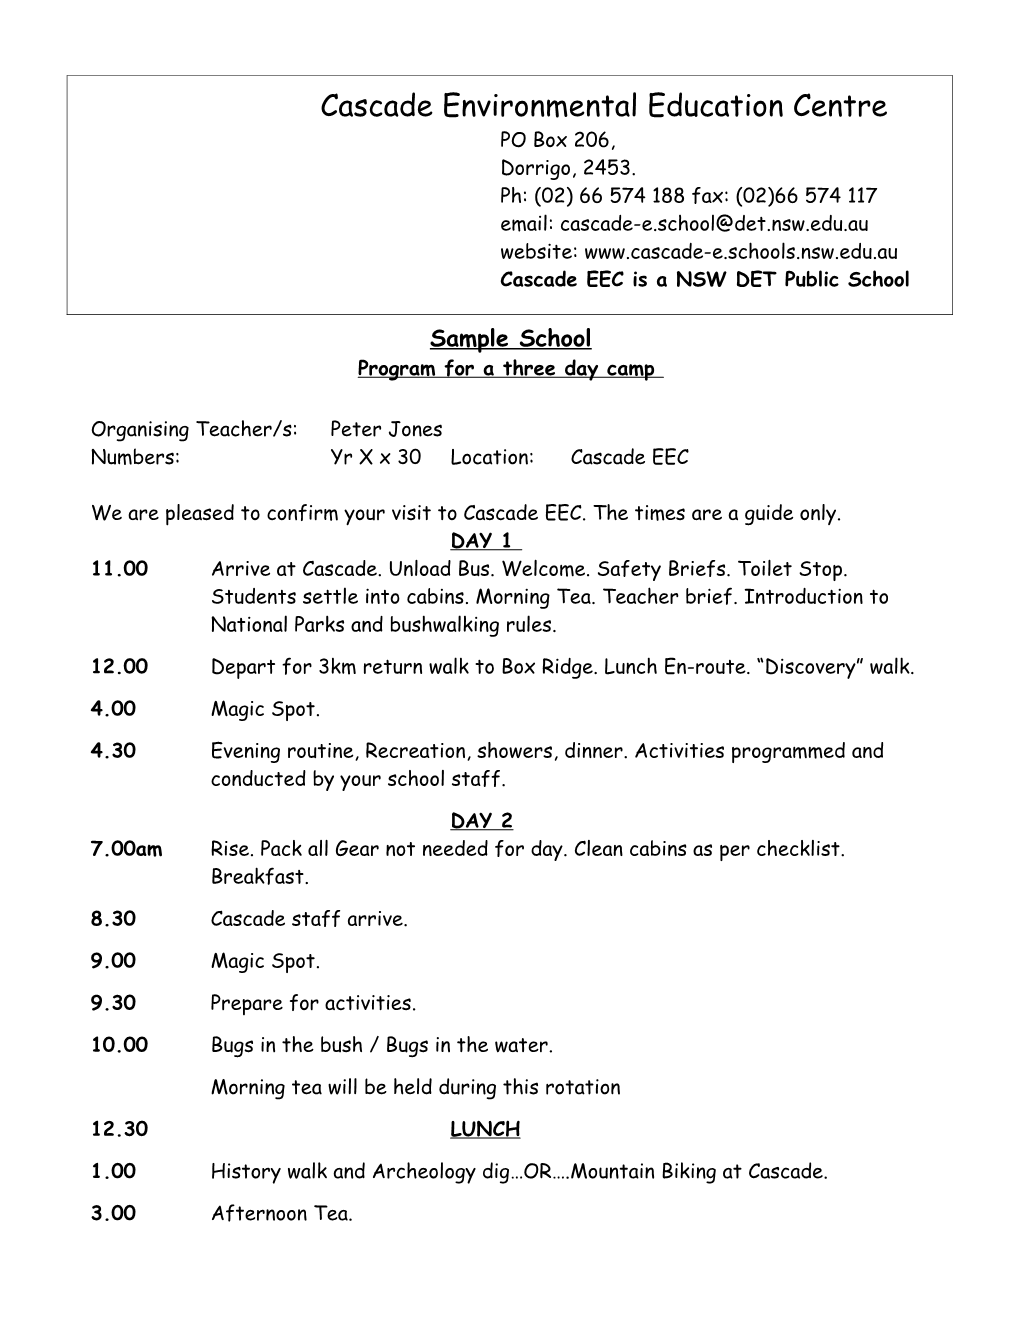 Program for a Three Day Camp